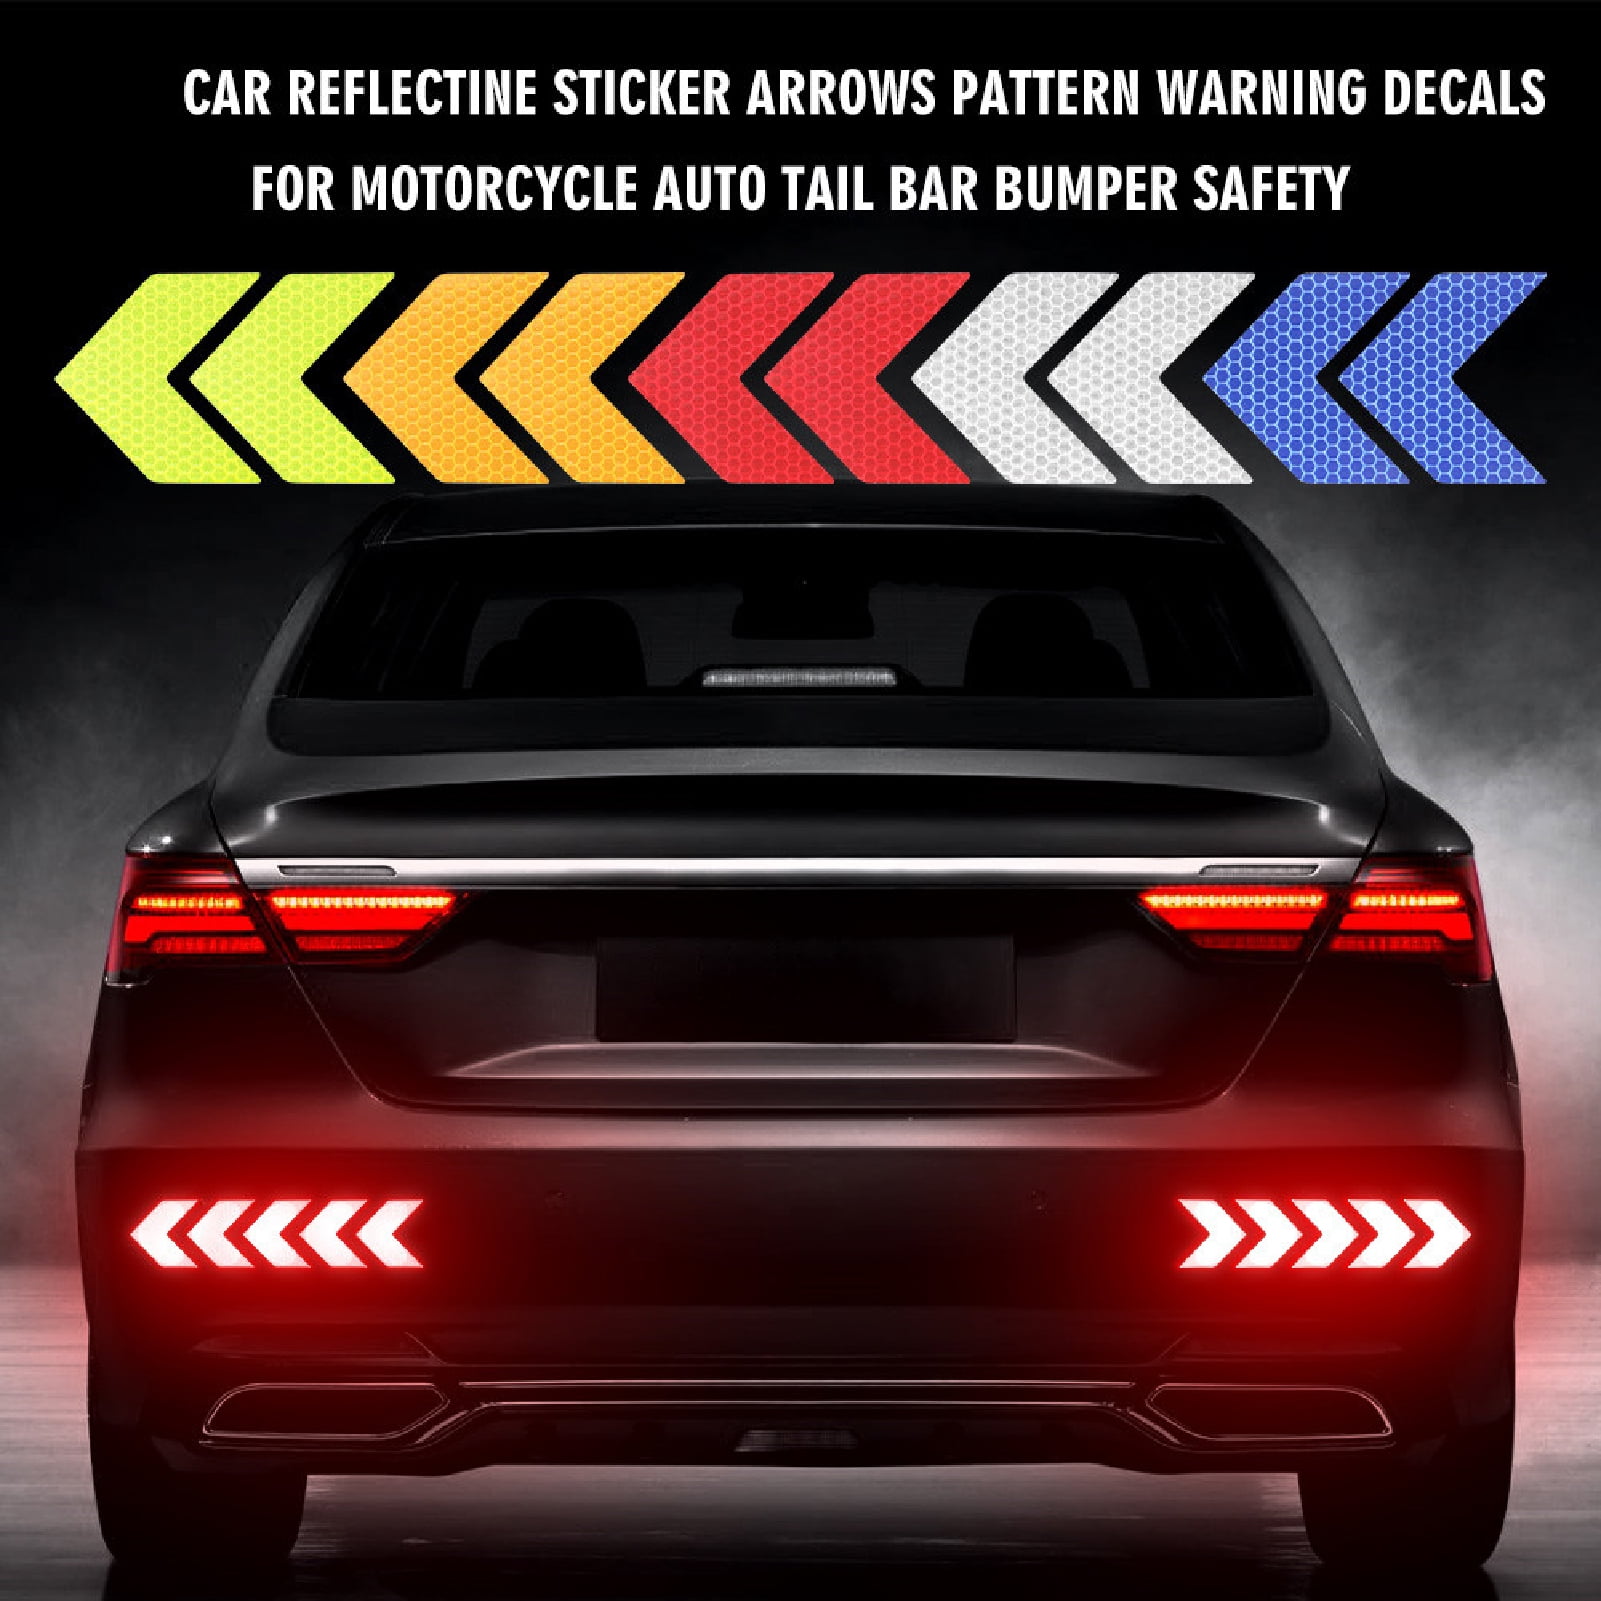 0.4''197'' Car Reflective Strips Stickers for Body Rim, Funny DIY Warning Safety Decoration Strip Decals, Self-Adhesive Night Visibility Reflective Ta